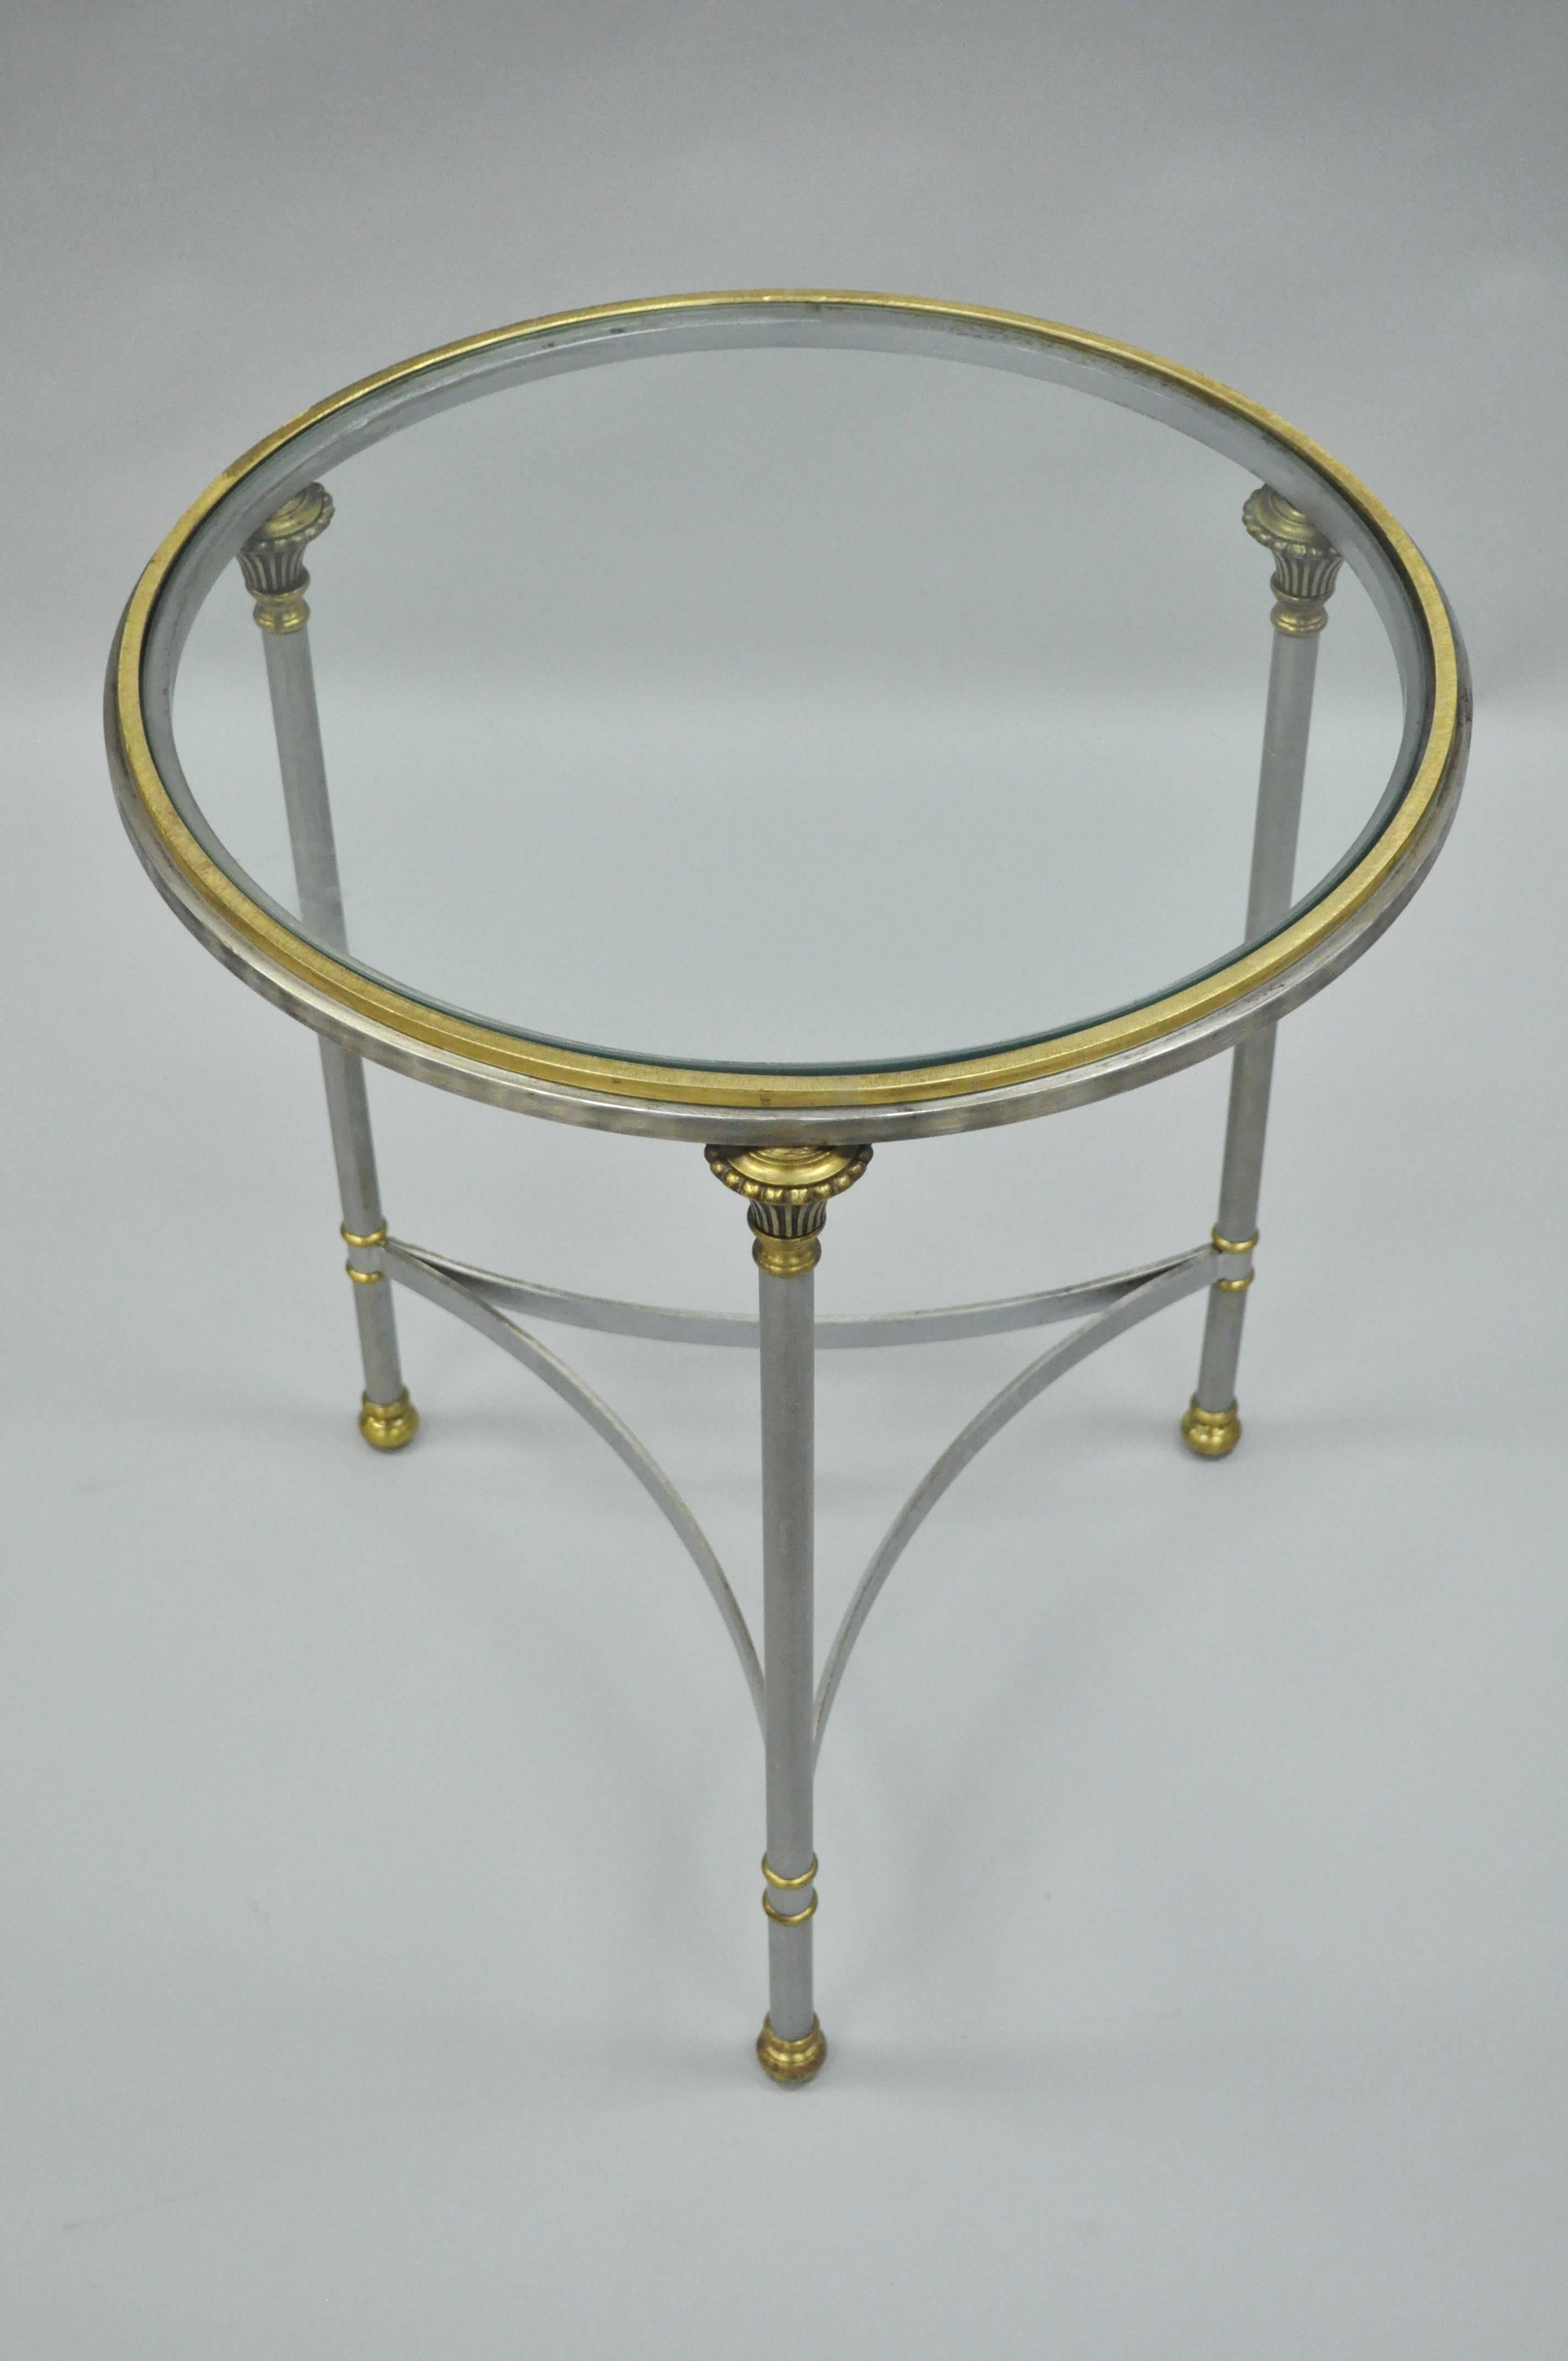 Elegant vintage Italian brushed steel and brass round accent table in the manner of Maison Jansen. Item features a round form with solid brass gallery, inset glass top, brushed steel stretcher supported frame, brass accents, and quintessential